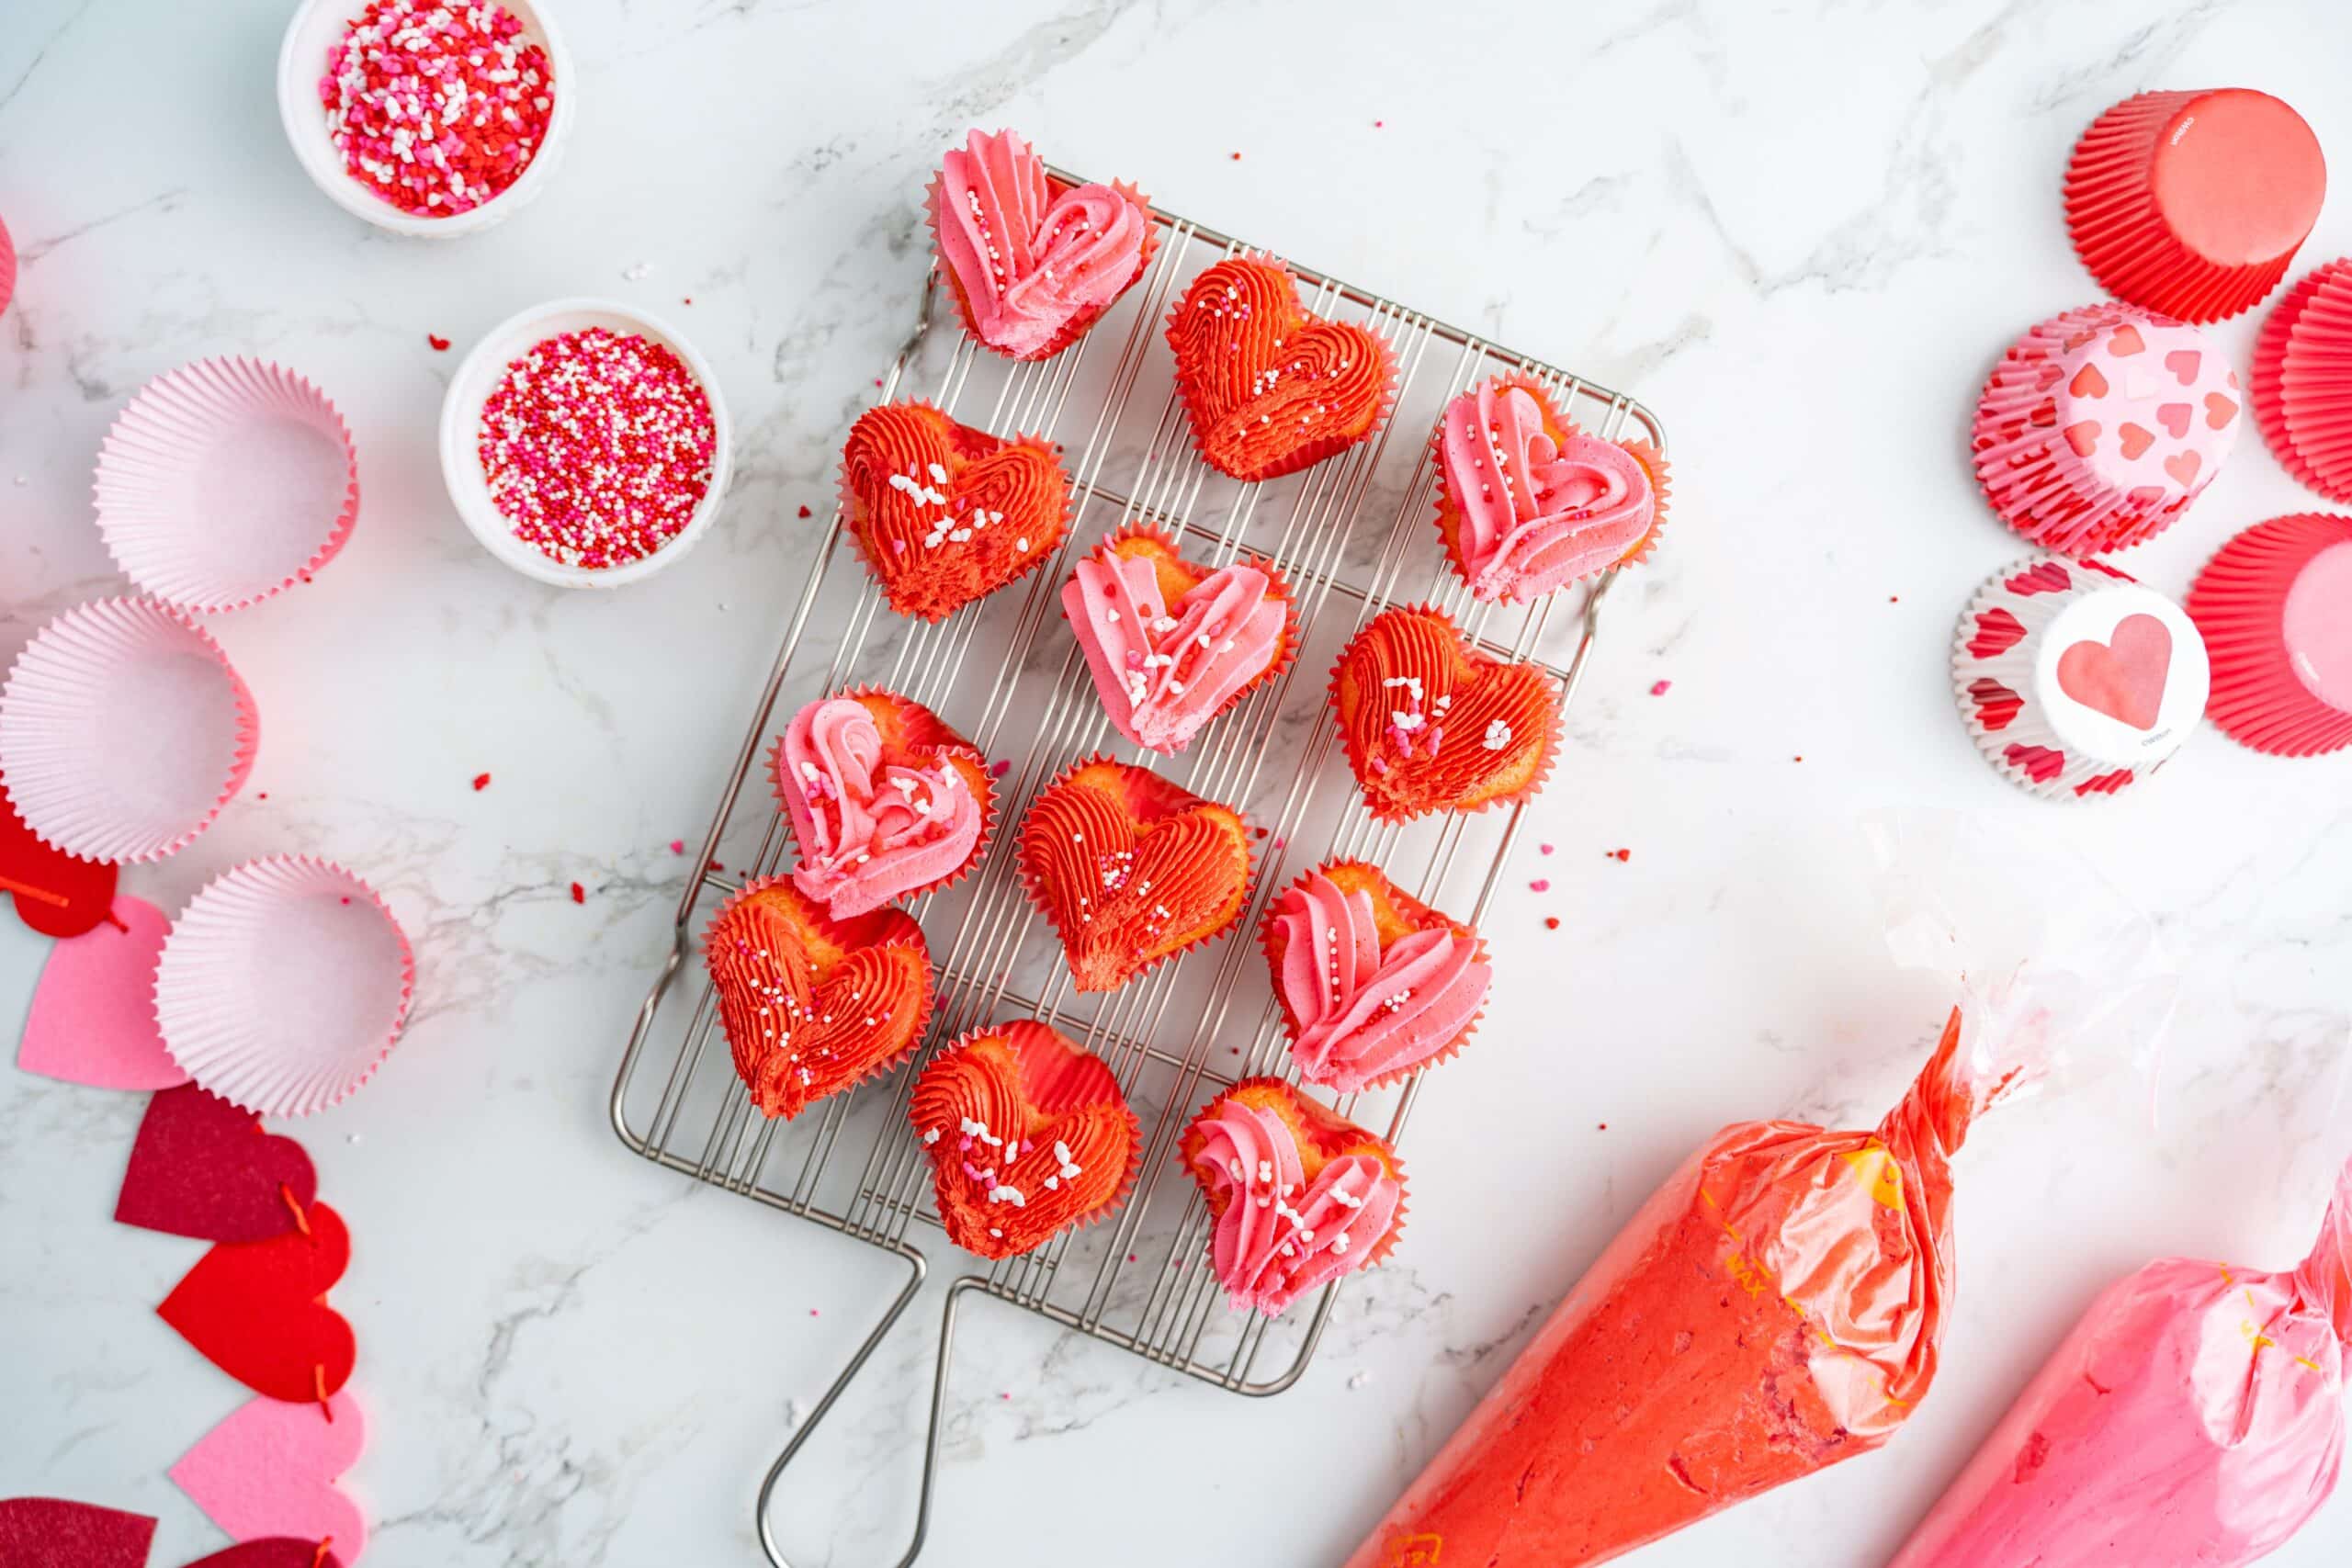 heart shaped cupcakes (easy Valentine's cupcakes)